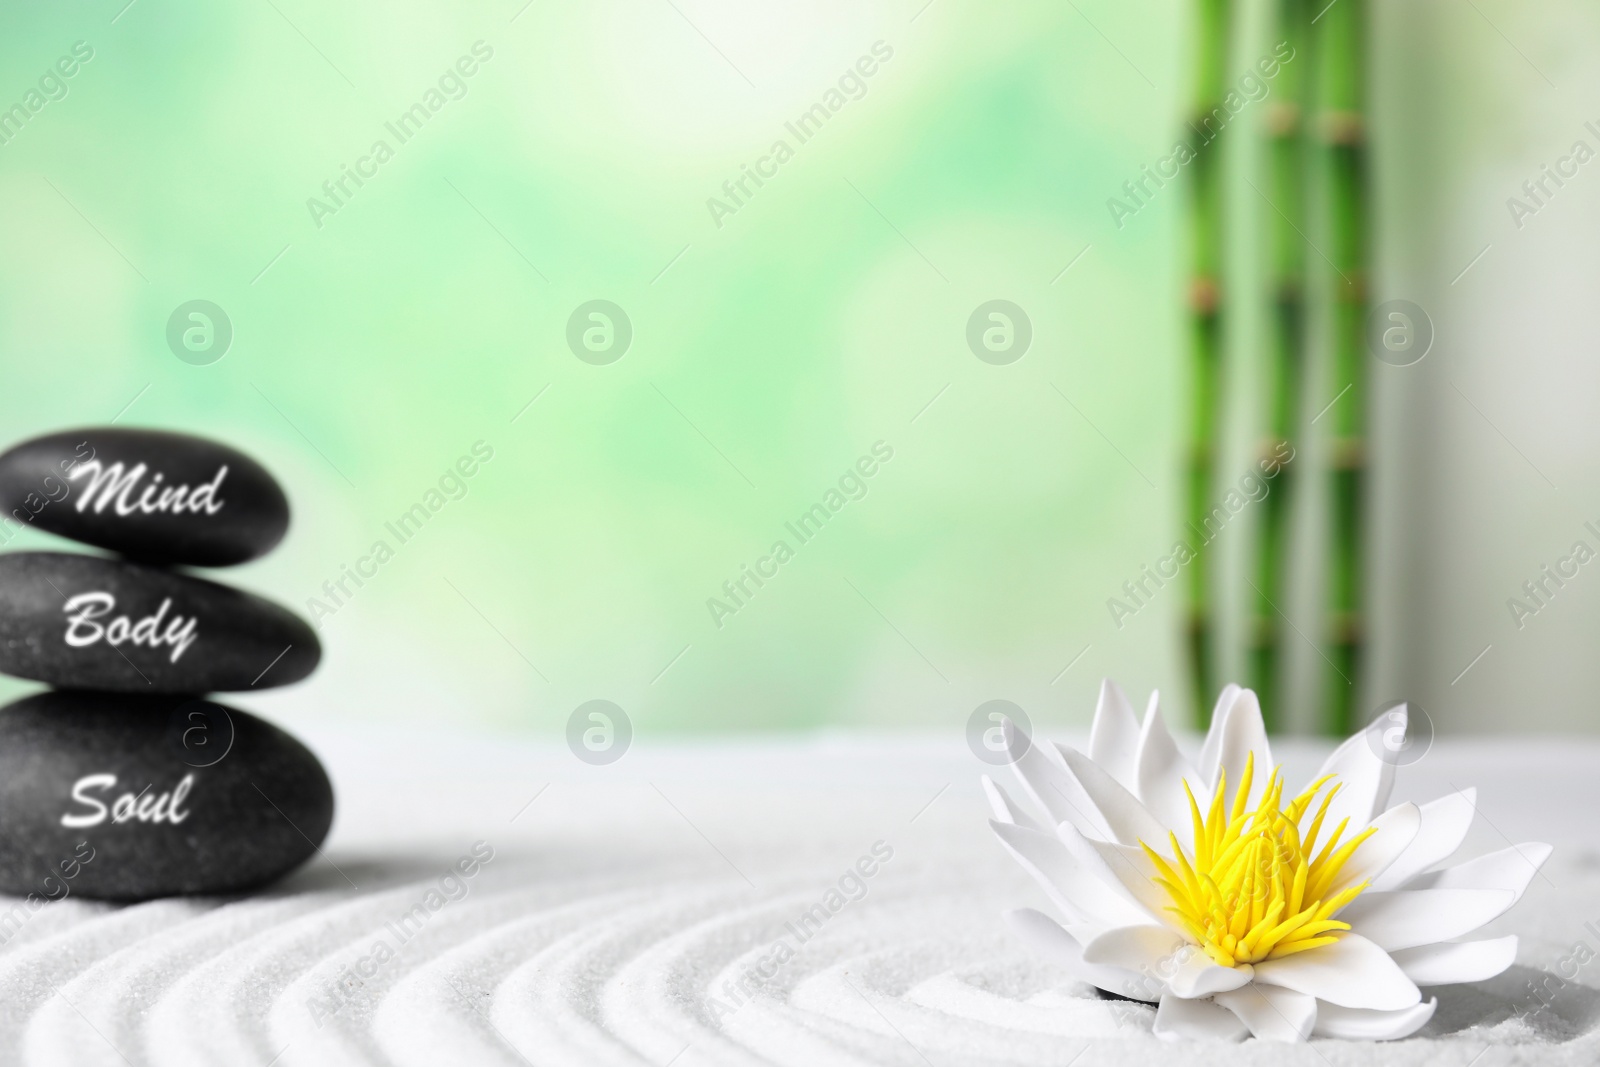 Photo of Stones with words Mind, Body, Soul and lotus flower on white sand. Zen garden